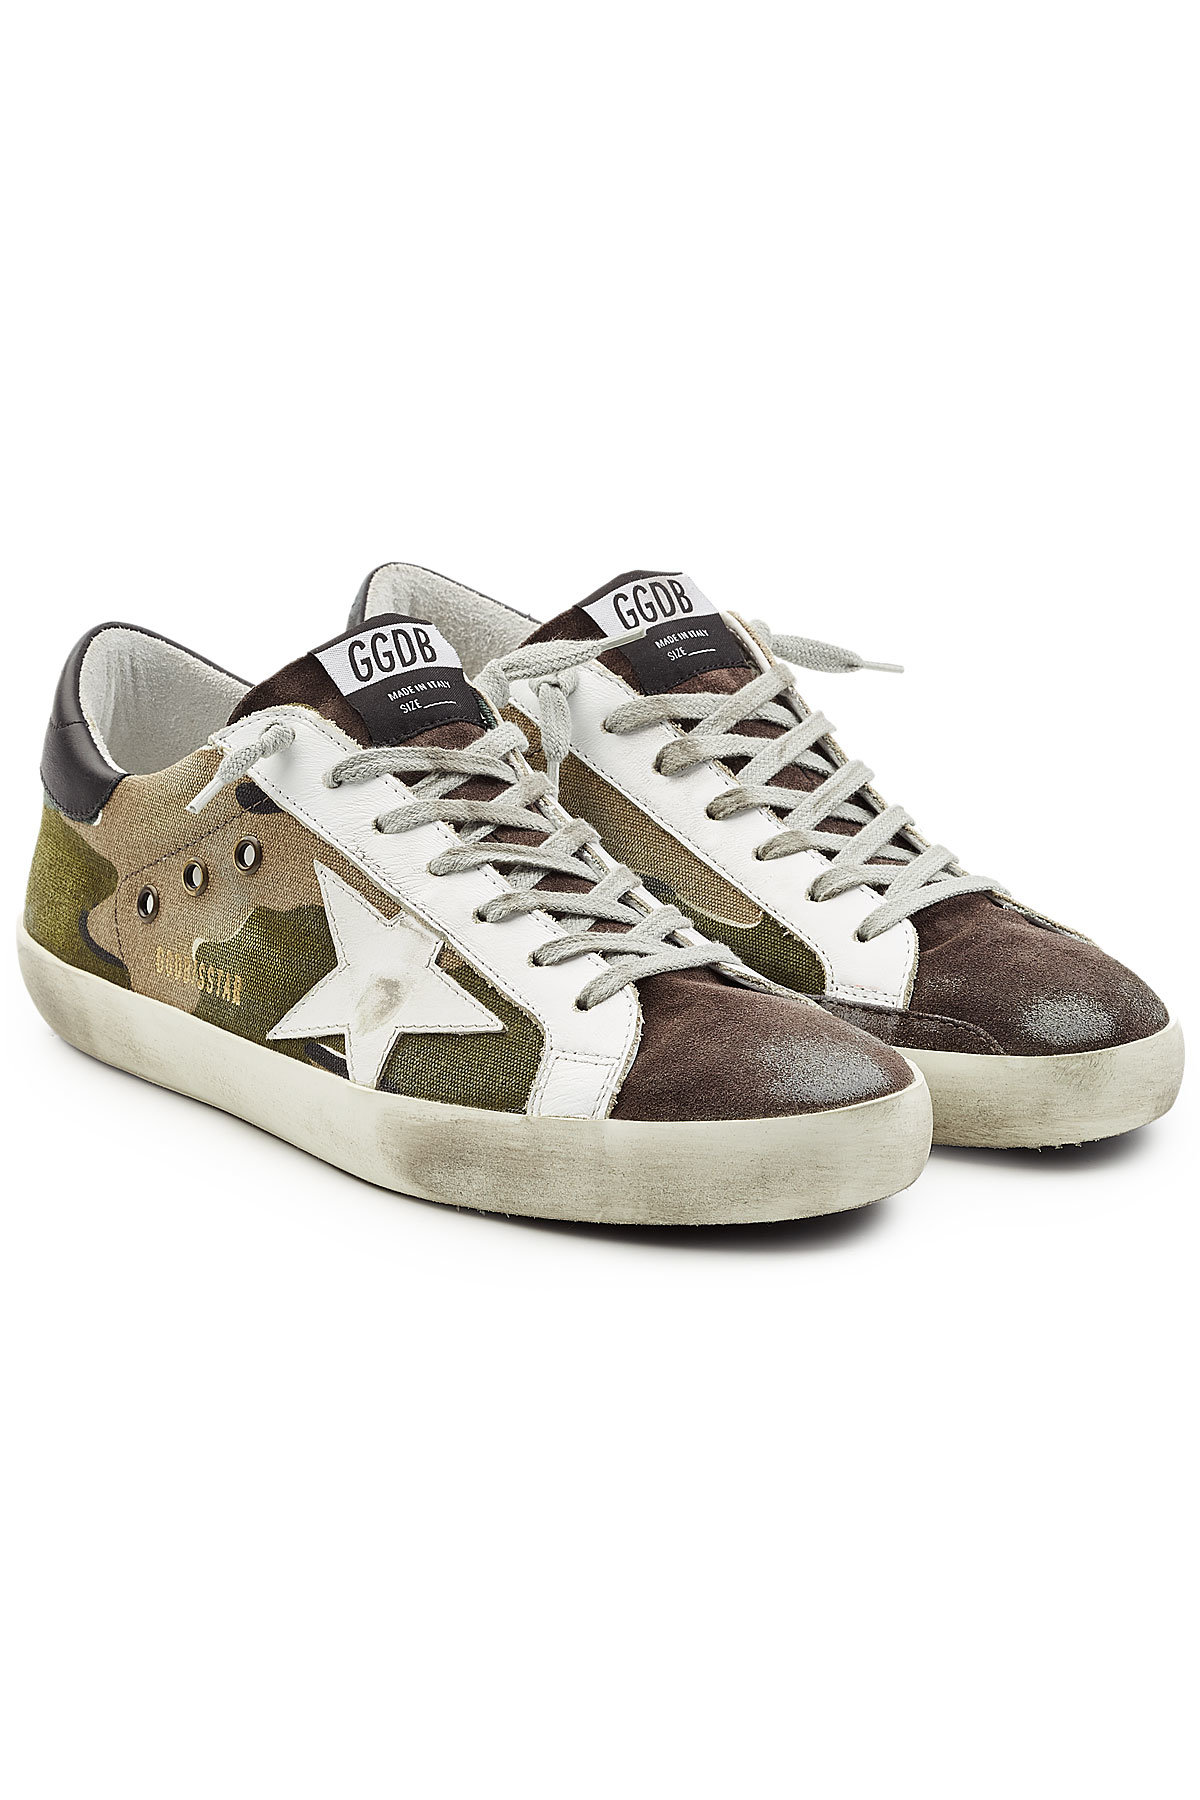 Golden Goose Deluxe Brand - Super Star Sneakers with Leather and Suede